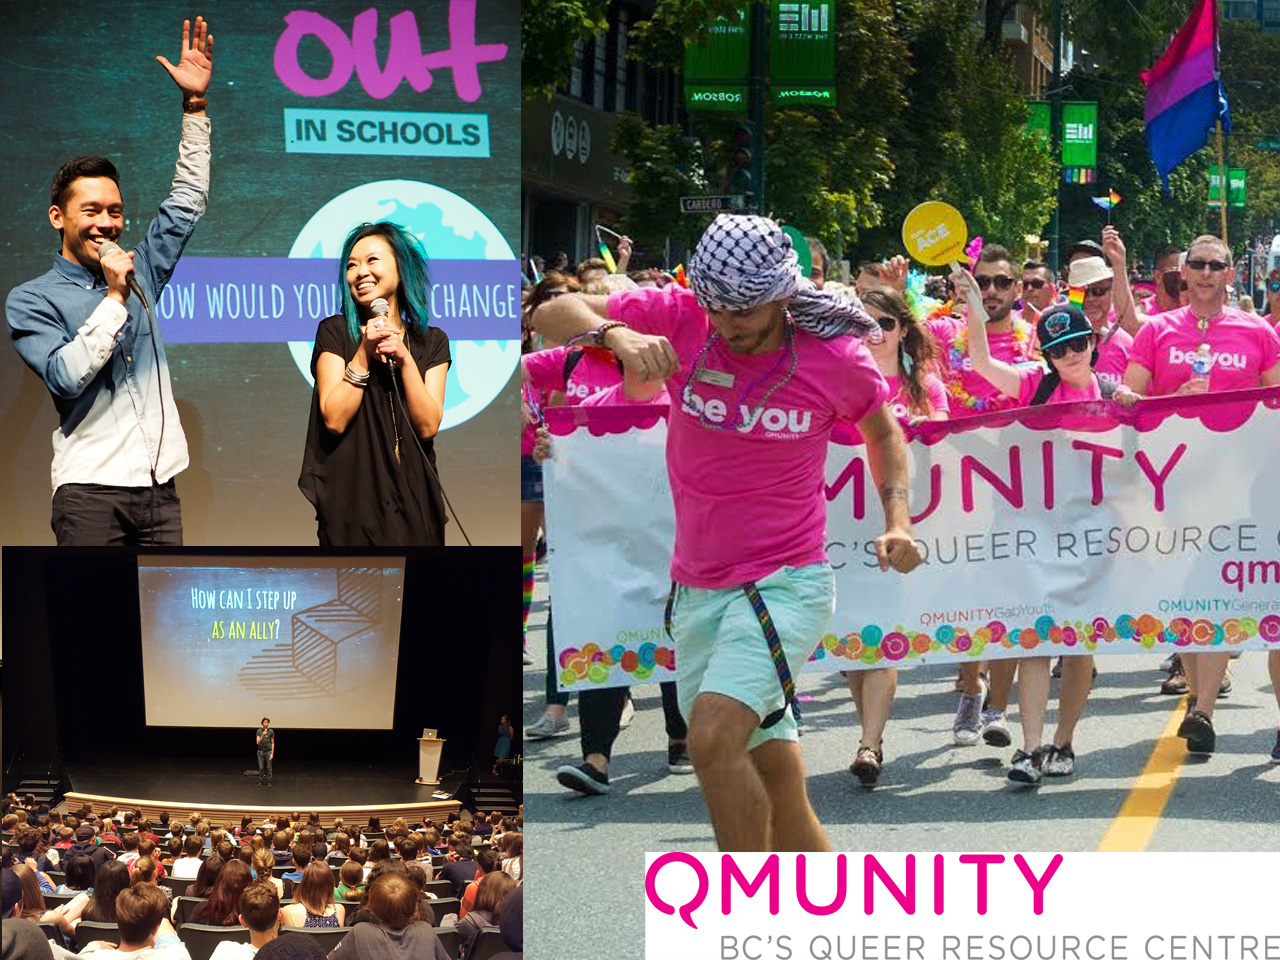 Collage of people public speaking and going on parade labeled "Qmunity: BC's Queer Resource Centre"